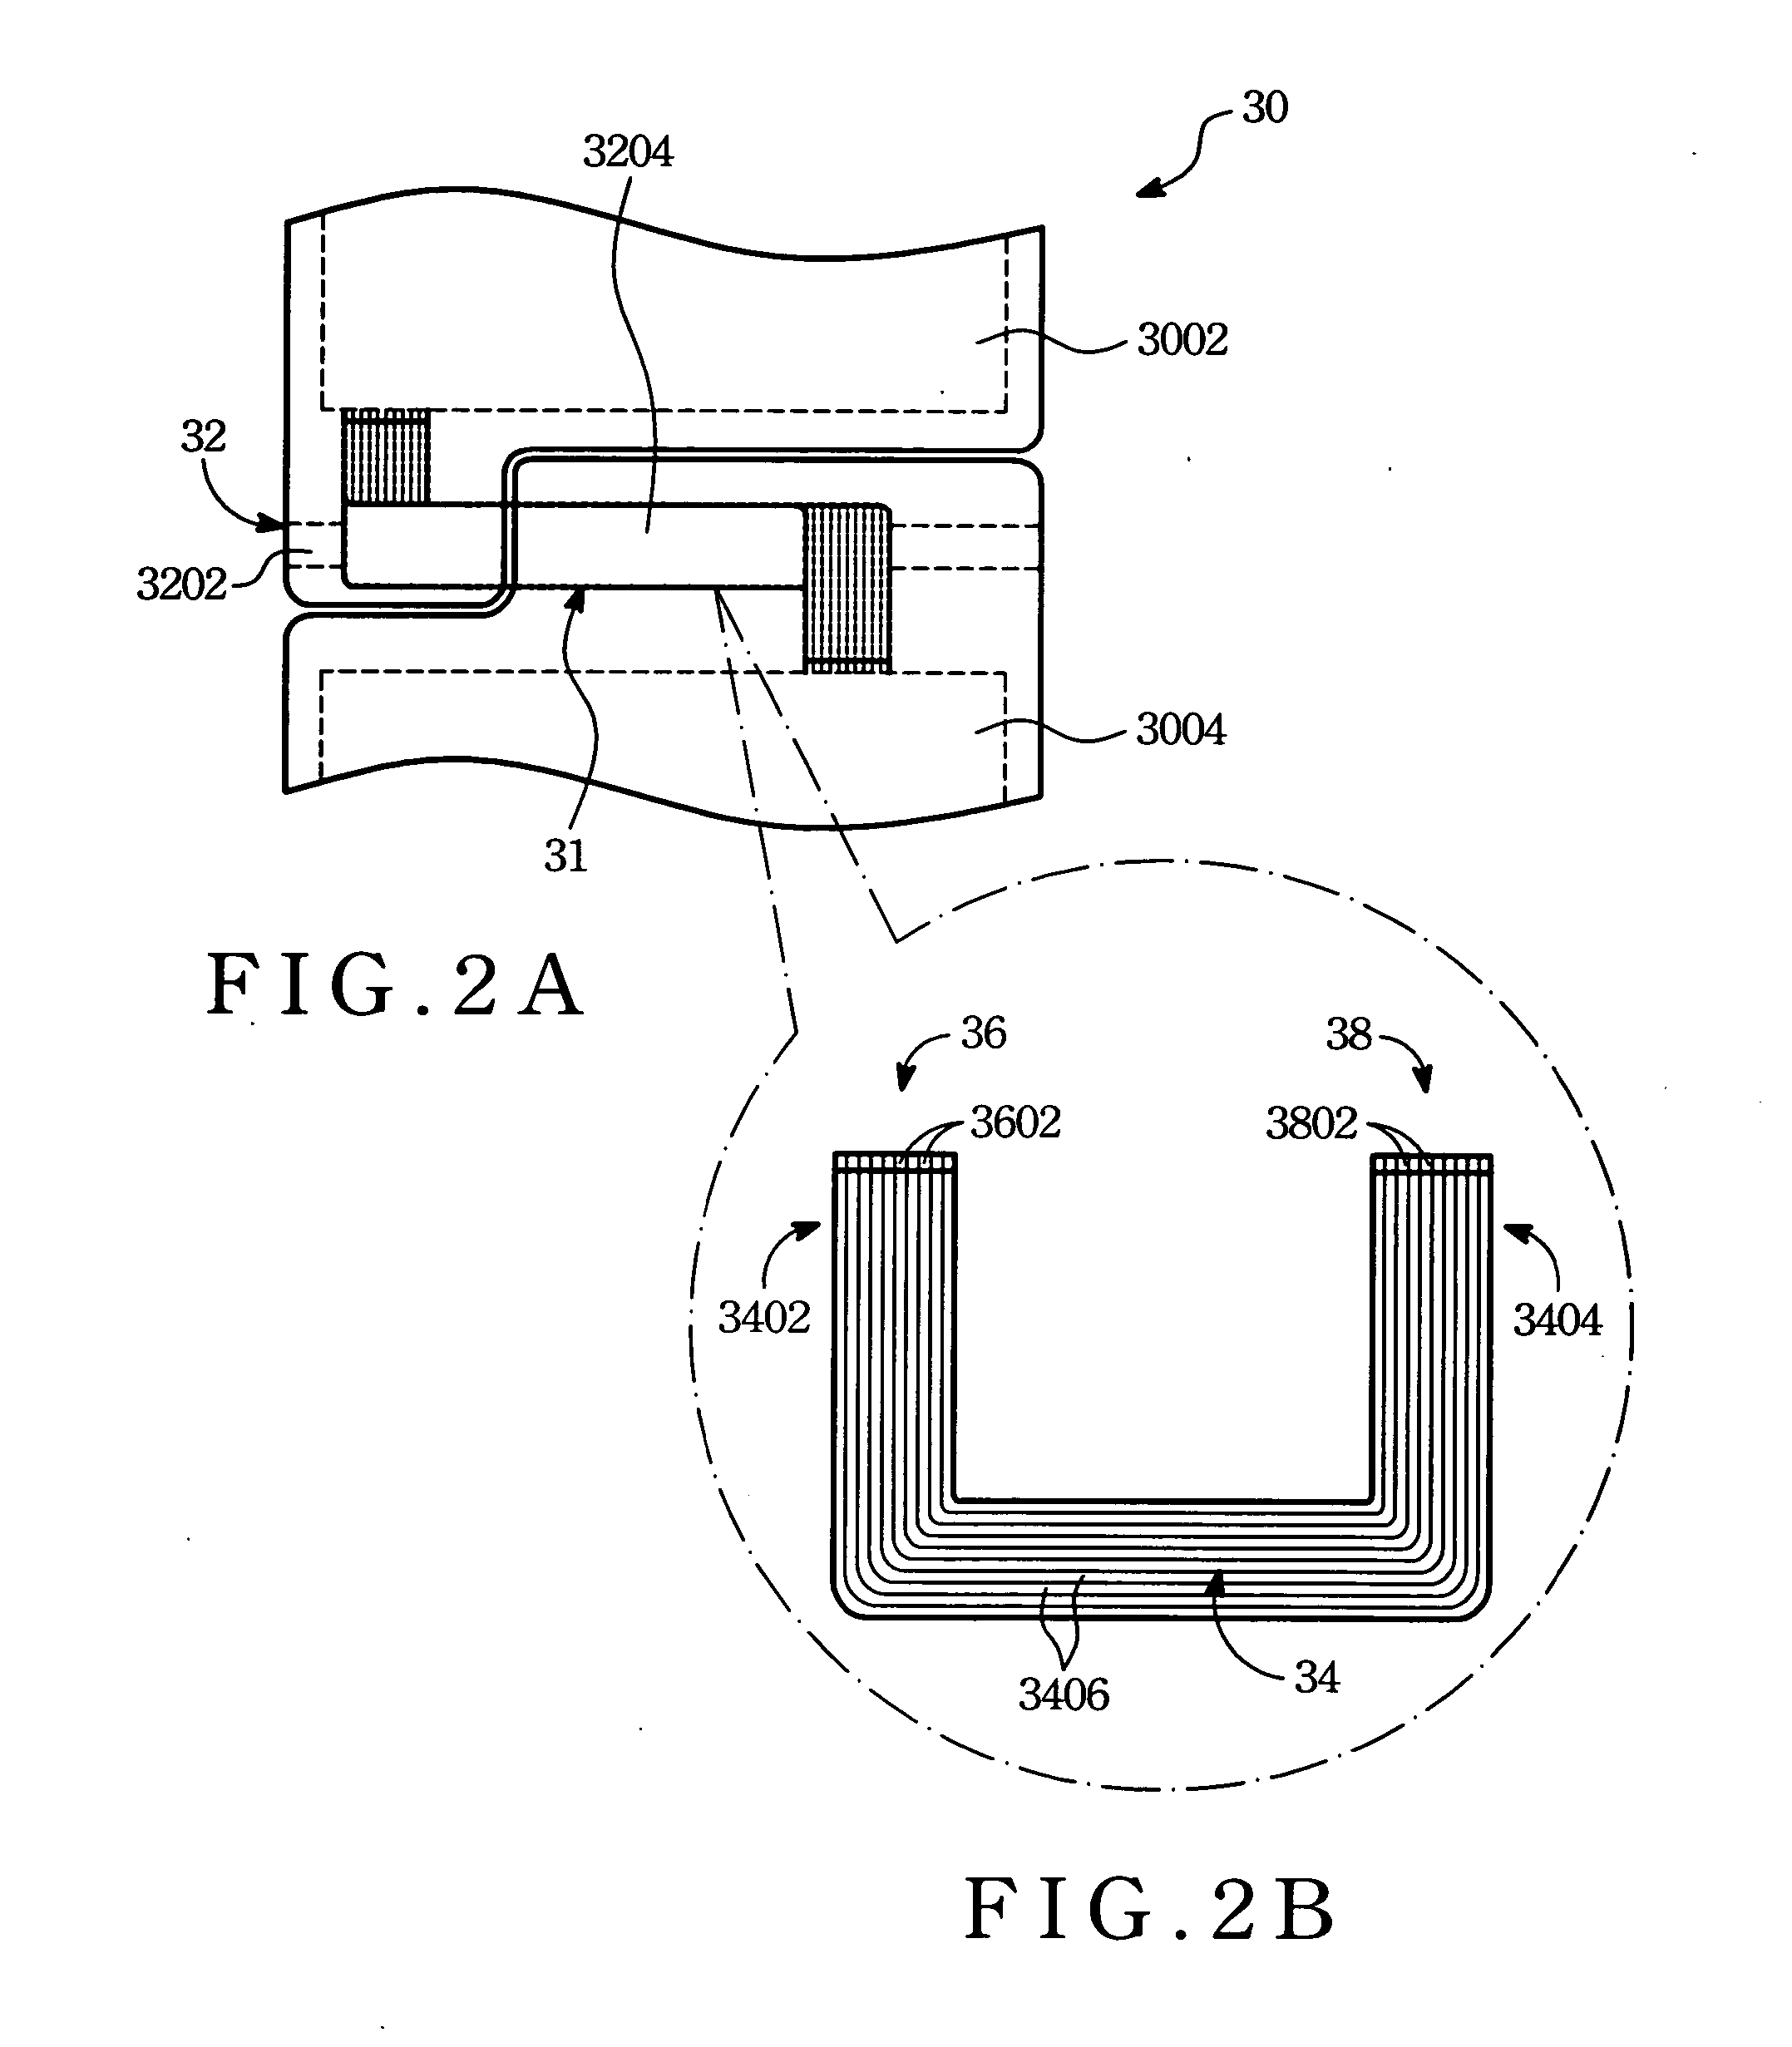 Electronic device including first and second parts and a flexible printed circuit board for electrically connecting the two